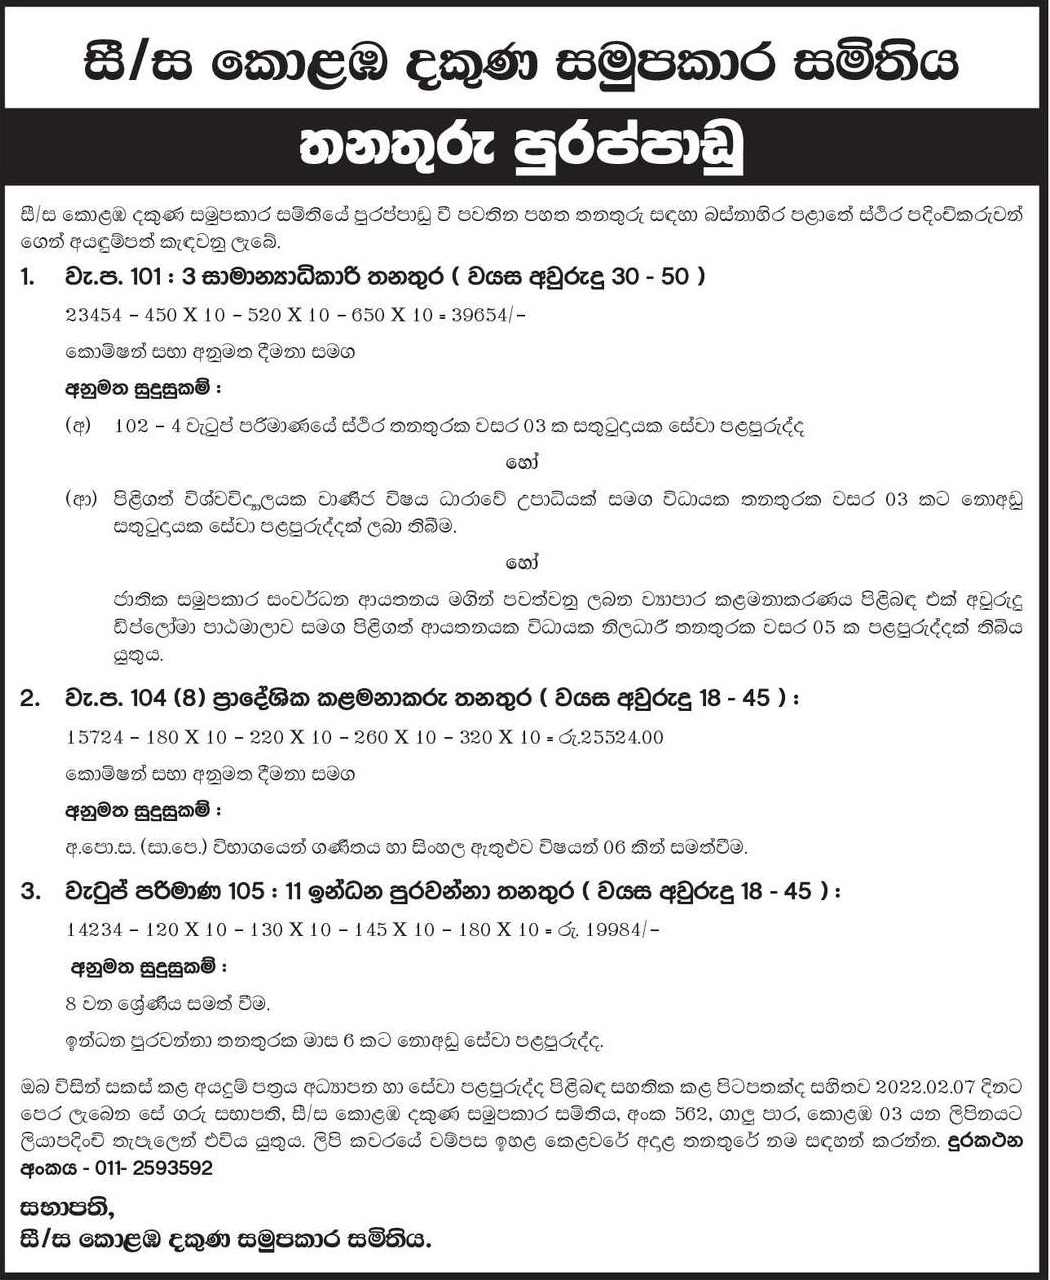 General Manager, Regional Manager, Fuel Filler - Colombo South Co-operative Society Limited